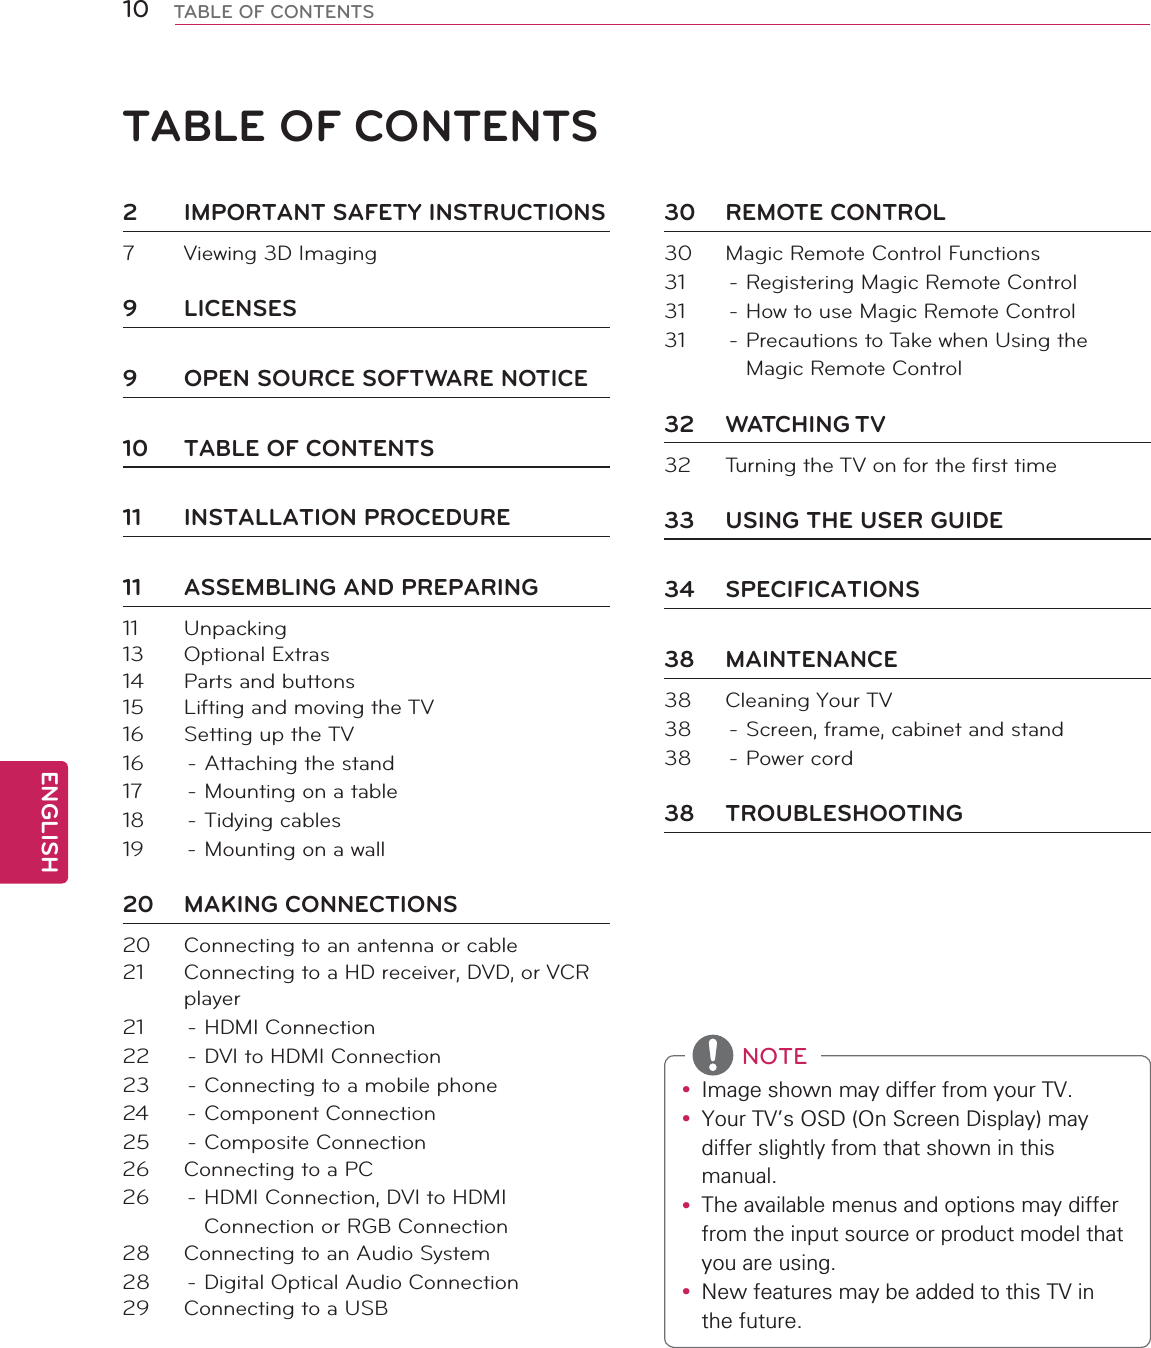 ENGLISH10 TABLE OF CONTENTSTABLE OF CONTENTSy ,PDJHVKRZQPD\GLIIHUIURP\RXU79y &lt;RXU79V26&apos;2Q6FUHHQ&apos;LVSOD\PD\GLIIHUVOLJKWO\IURPWKDWVKRZQLQWKLVPDQXDOy 7KHDYDLODEOHPHQXVDQGRSWLRQVPD\GLIIHUIURPWKHLQSXWVRXUFHRUSURGXFWPRGHOWKDW\RXDUHXVLQJy 1HZIHDWXUHVPD\EHDGGHGWRWKLV79LQWKHIXWXUHNOTE2  IMPORTANT SAFETY INSTRUCTIONS7  Viewing 3D Imaging9 LICENSES9  OPEN SOURCE SOFTWARE NOTICE10  TABLE OF CONTENTS11 INSTALLATION PROCEDURE11  ASSEMBLING AND PREPARING11 Unpacking13 Optional Extras14  Parts and buttons15  Lifting and moving the TV16  Setting up the TV16  - Attaching the stand17  - Mounting on a table18 - Tidying cables19  - Mounting on a wall20 MAKING CONNECTIONS20  Connecting to an antenna or cable21  Connecting to a HD receiver, DVD, or VCR player21 - HDMI Connection22  - DVI to HDMI Connection23  - Connecting to a mobile phone24 - Component Connection25 - Composite Connection26  Connecting to a PC26  - HDMI Connection, DVI to HDMI Connection or RGB Connection28  Connecting to an Audio System28  - Digital Optical Audio Connection29  Connecting to a USB30 REMOTE CONTROL30  Magic Remote Control Functions31  - Registering Magic Remote Control31  - How to use Magic Remote Control31  - Precautions to Take when Using the Magic Remote Control32 WATCHING TV32  Turning the TV on for the first time33  USING THE USER GUIDE34 SPECIFICATIONS38 MAINTENANCE38  Cleaning Your TV38  - Screen, frame, cabinet and stand38 - Power cord38 TROUBLESHOOTING